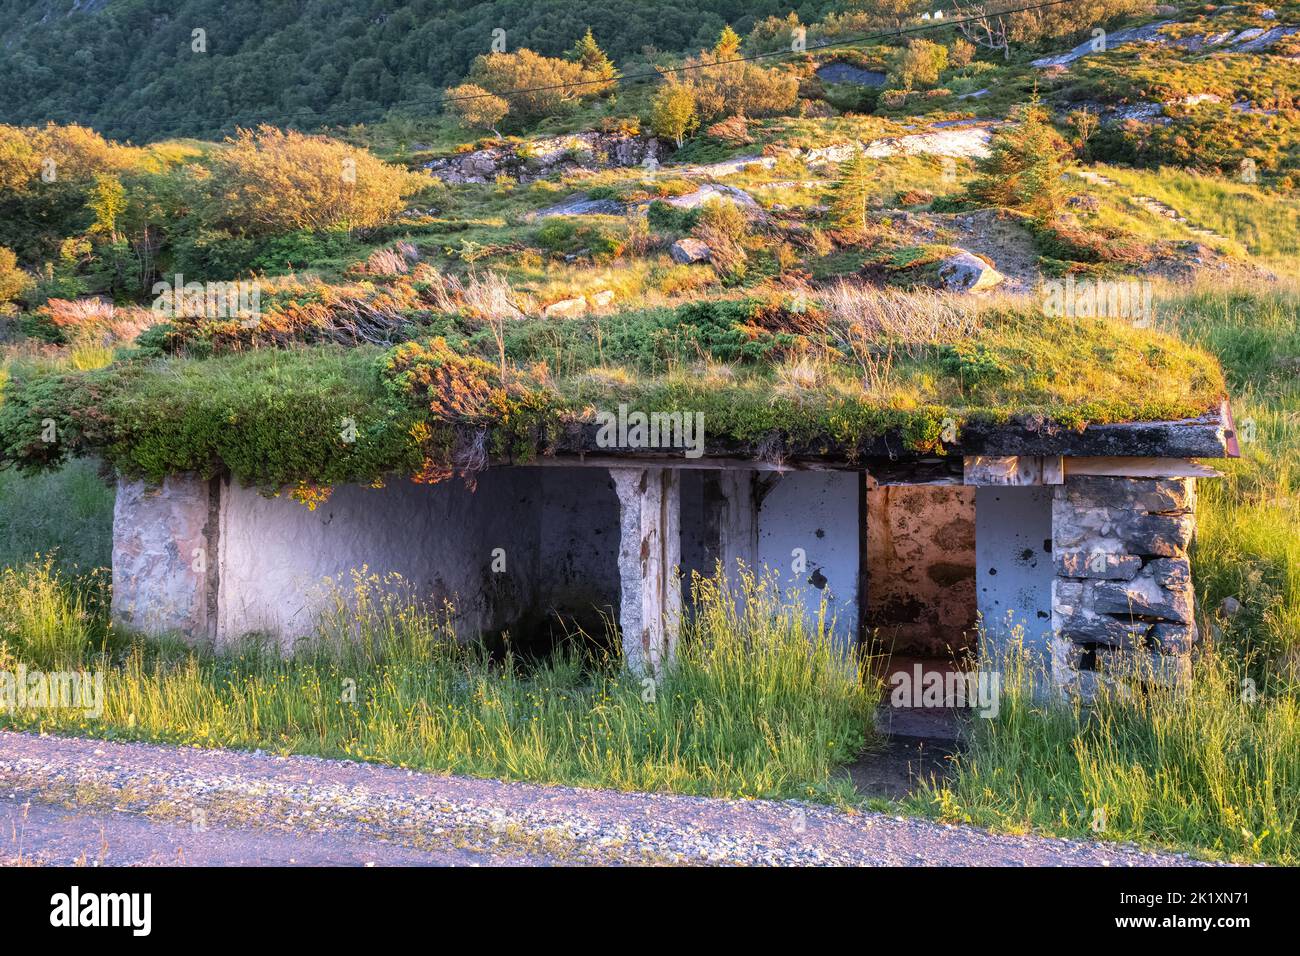 Hareid, Norway - June 25, 2022: Kvitneset costal Fort was built by the Germans during Second World War with firing positions, prison camps, command bu Stock Photo